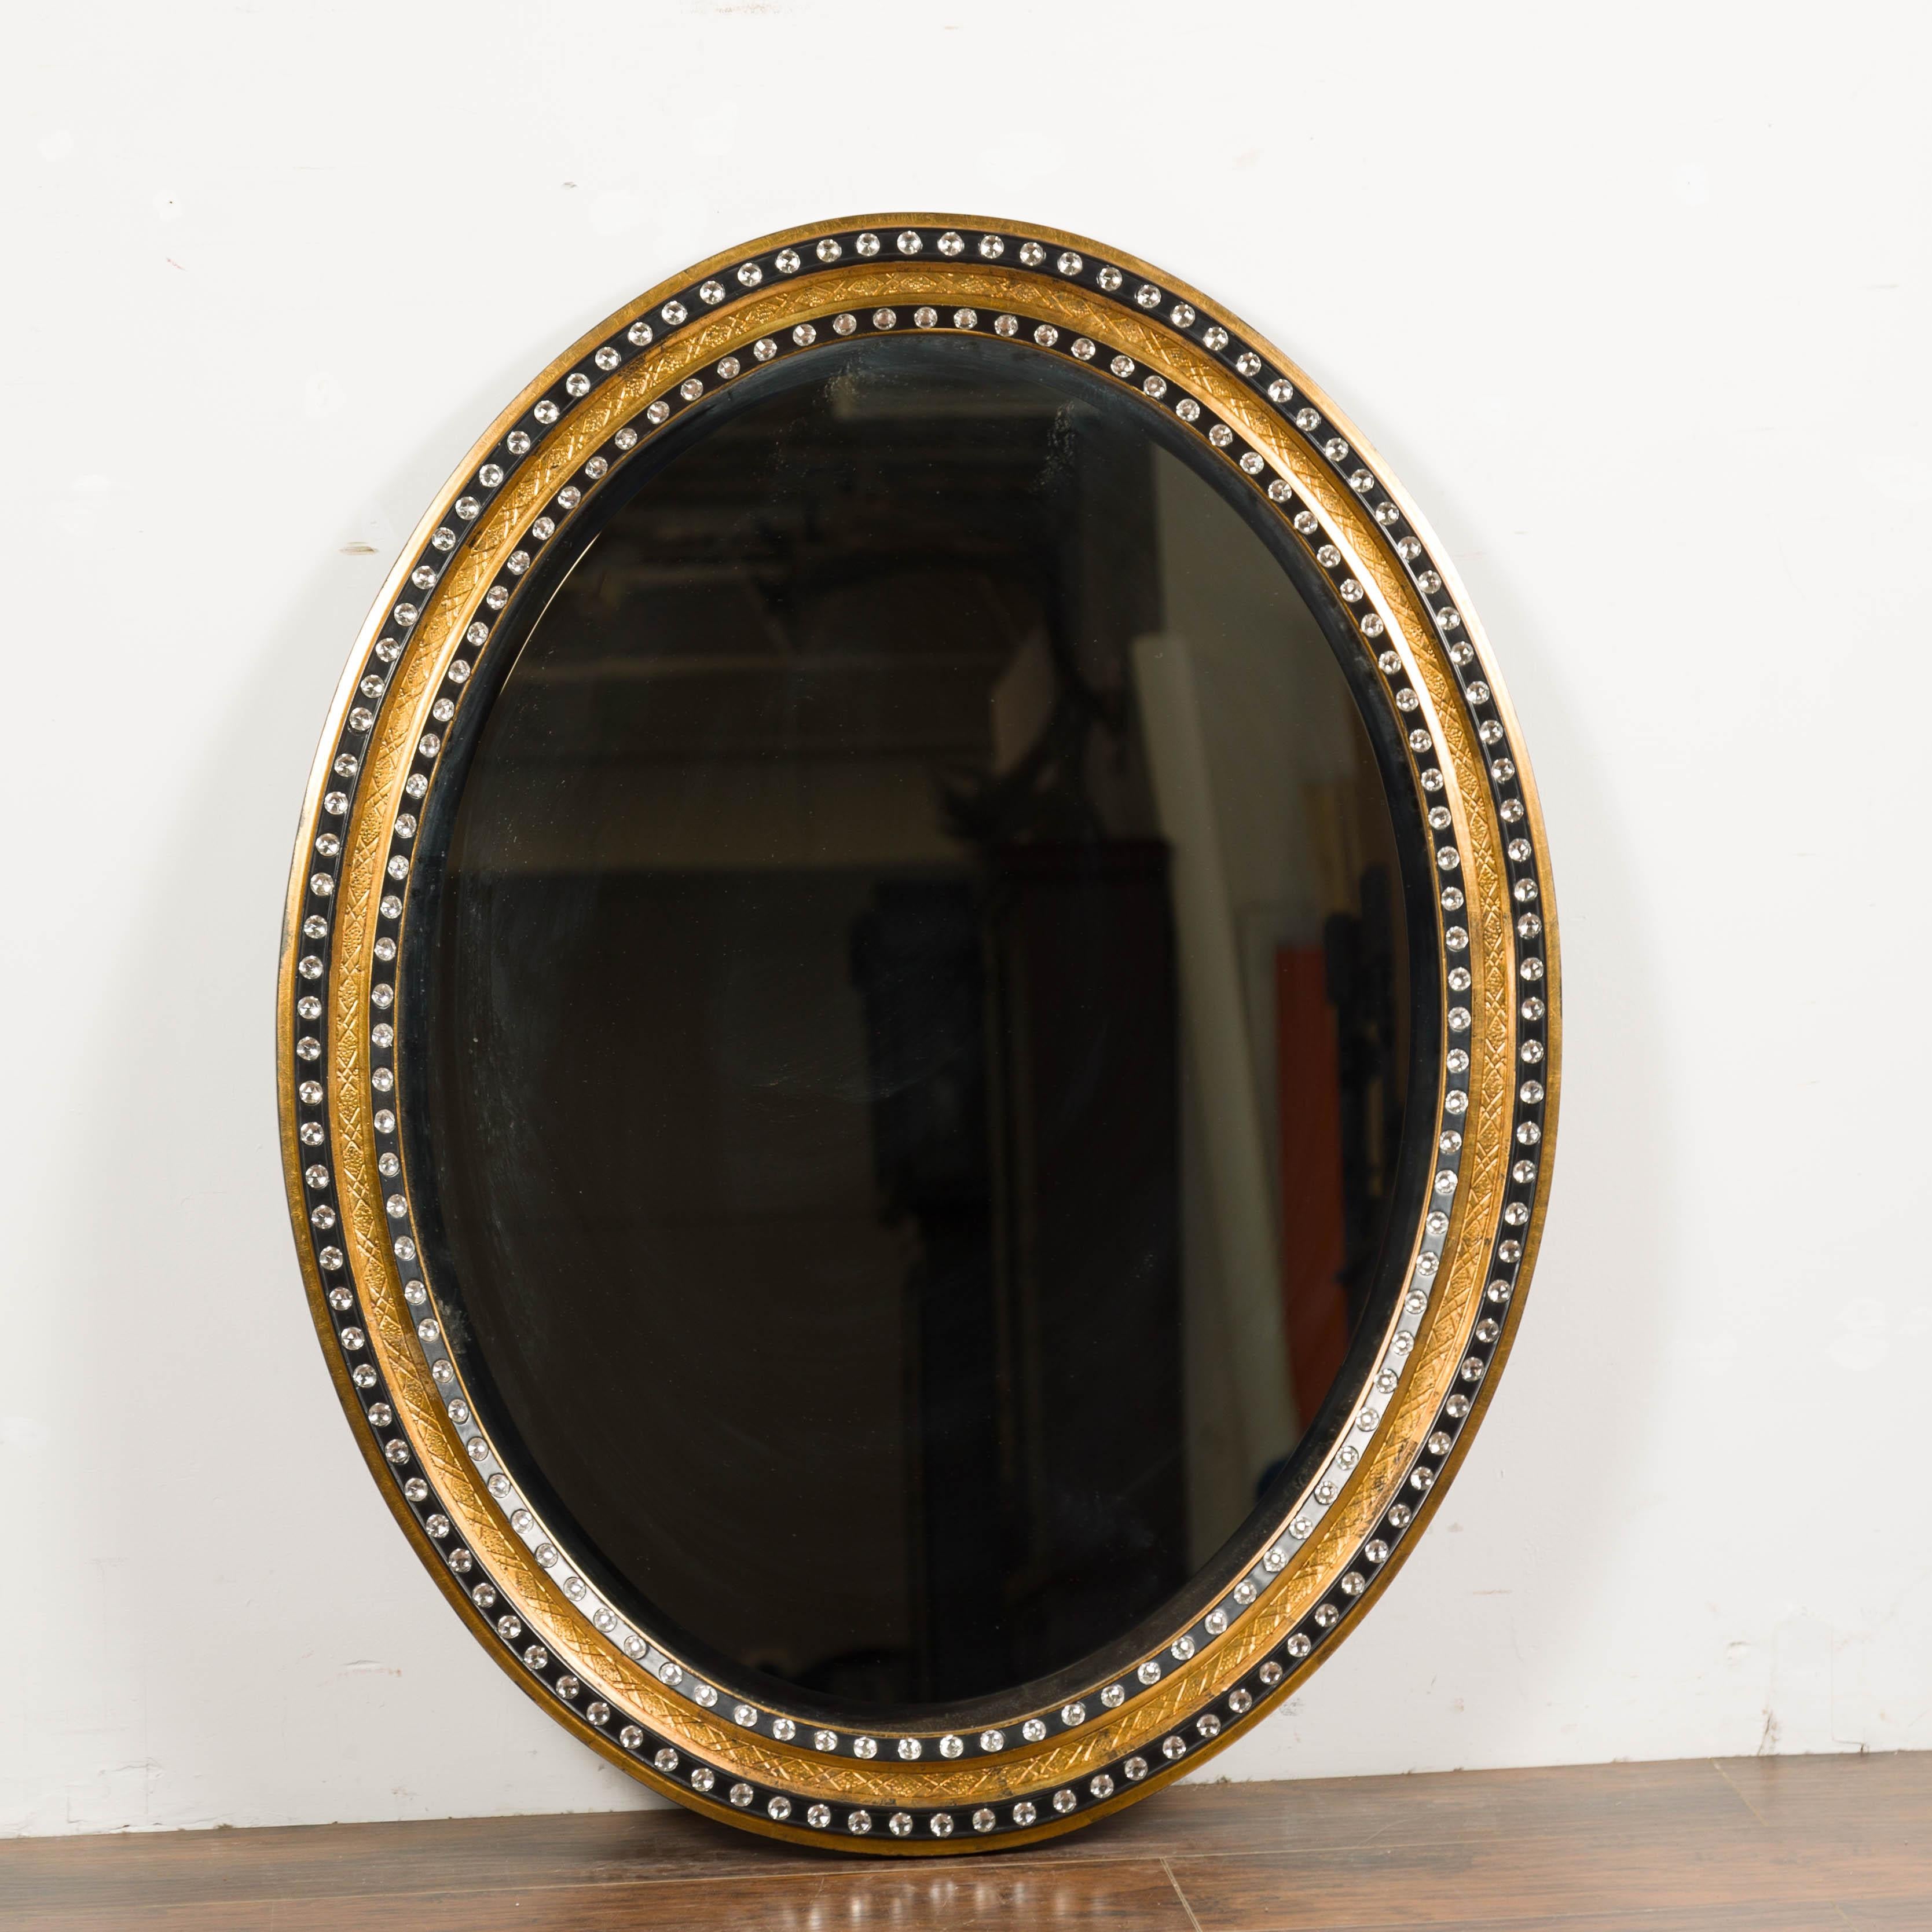 Midcentury Irish Oval Gold and Black Mirror with Diamanté Décor For Sale 5